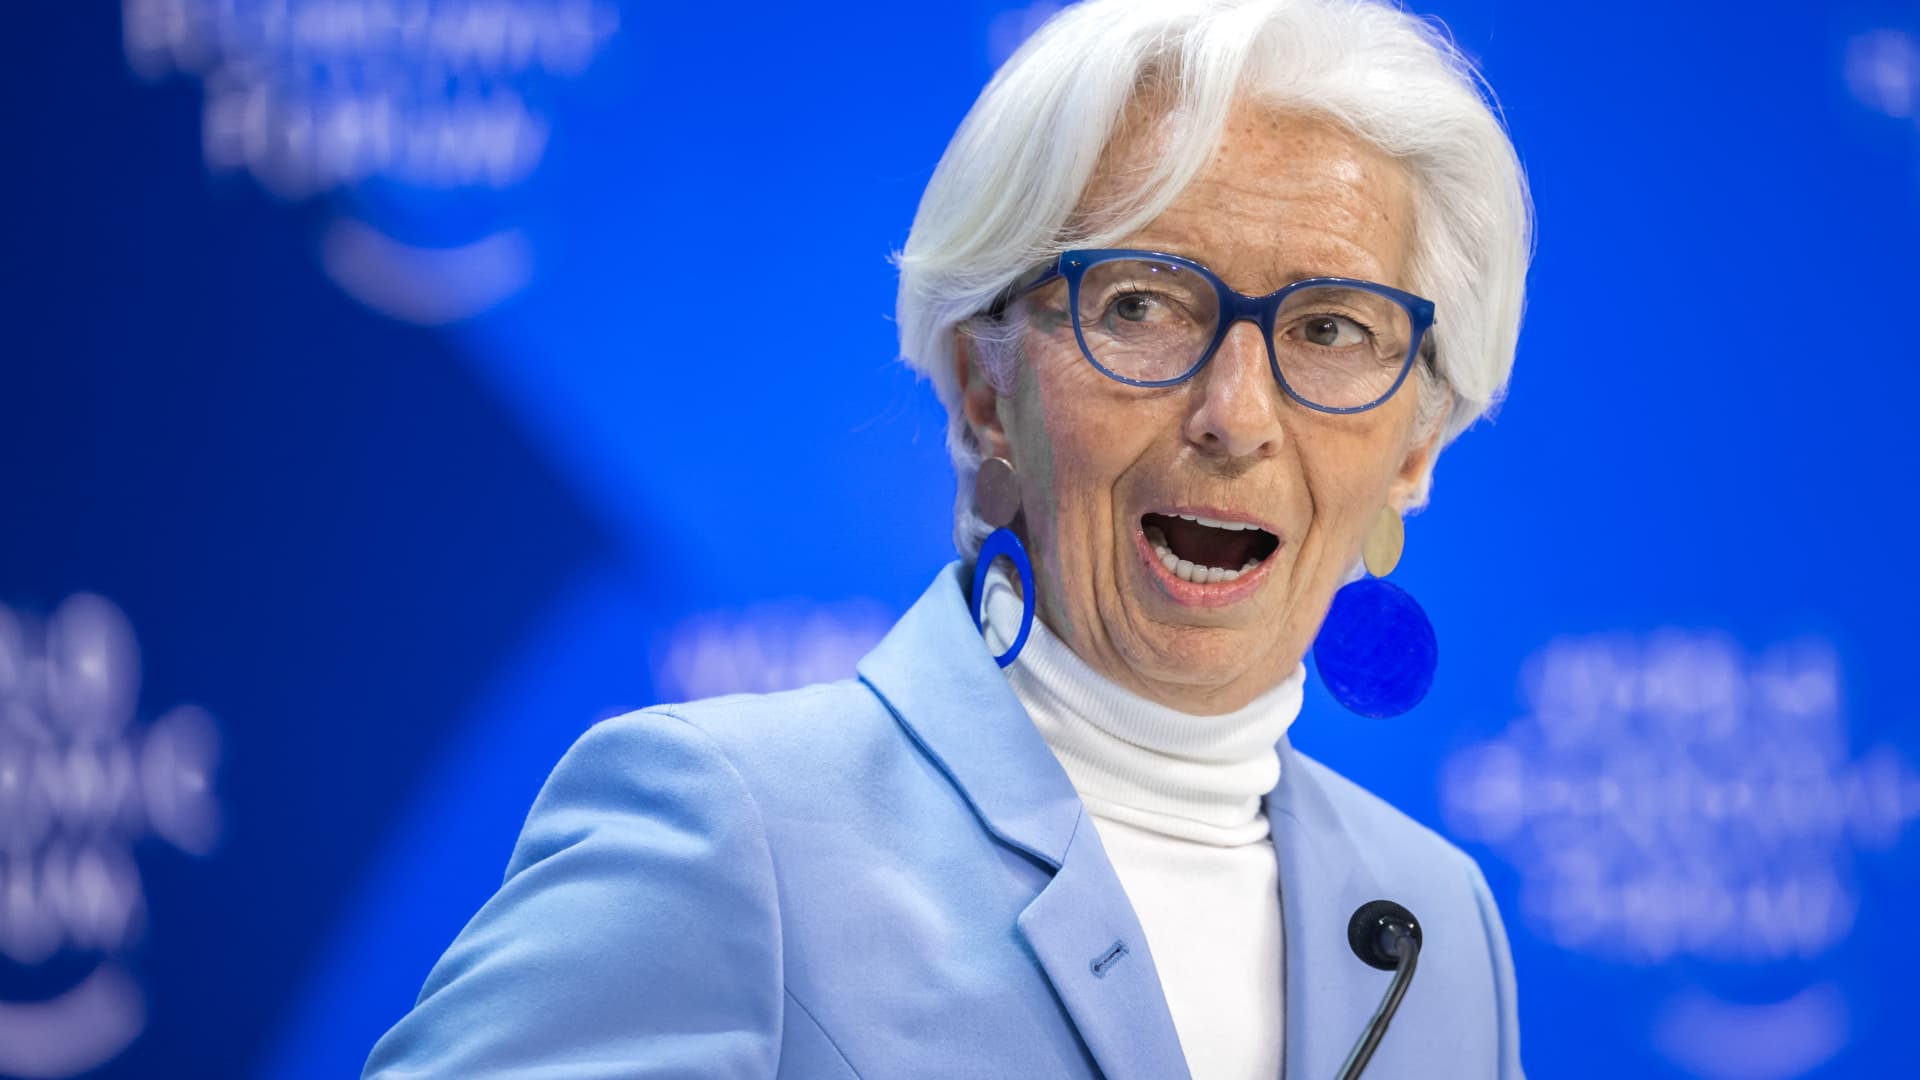 Attack is the best defense in international competition: ECB's Lagarde